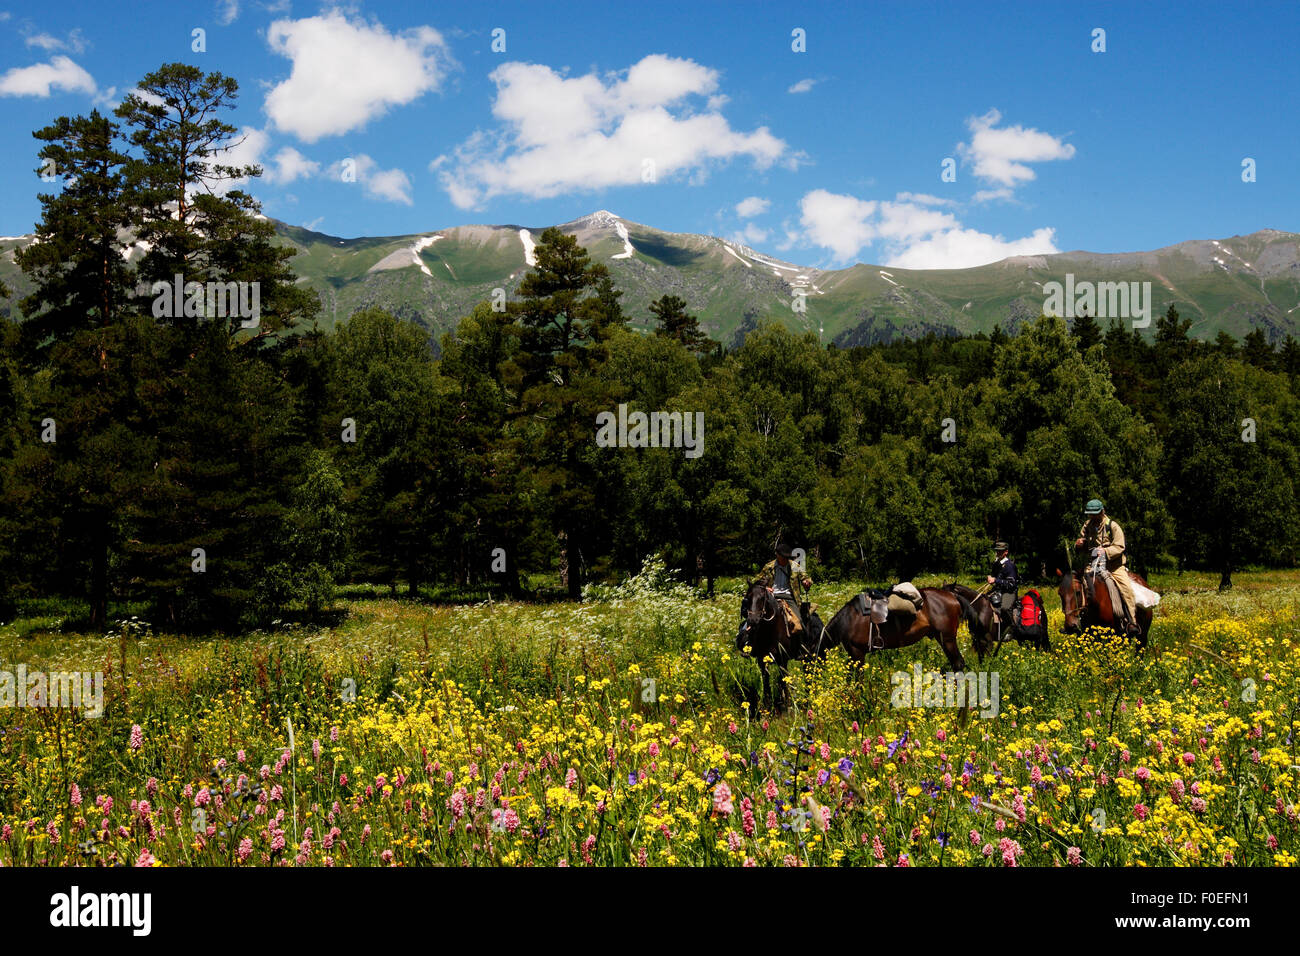 People horse riding through flower meadows, Arkhyz valley in the western part of the Teberdinsky Biosphere reserve, Caucasus, Russia, July 2008 (Model released) Stock Photo